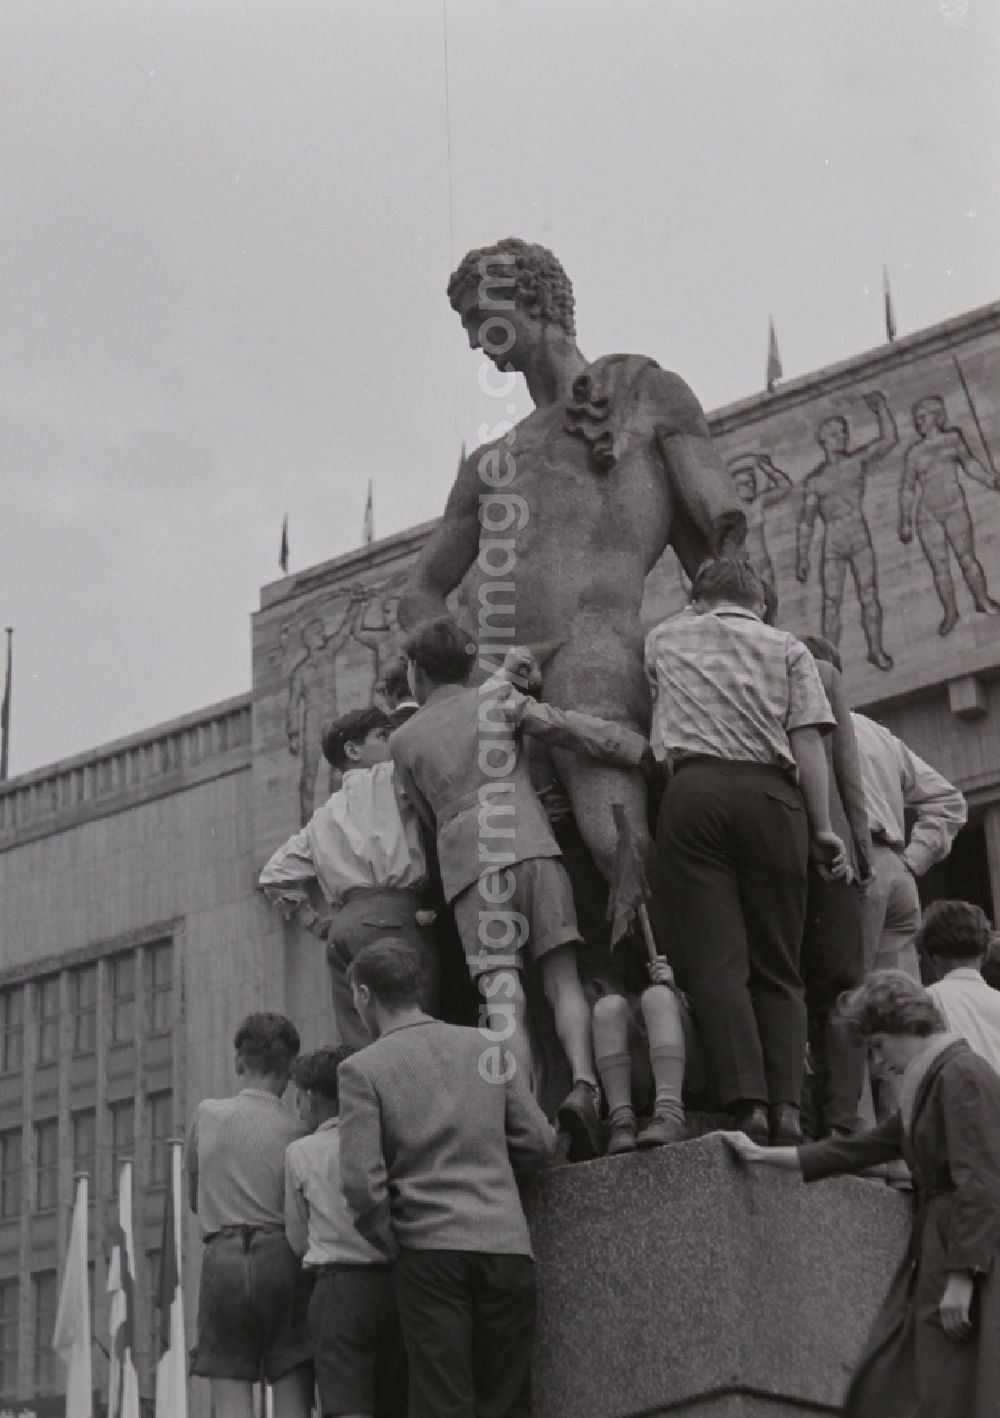 GDR image archive: Berlin - Fun and games for children and teenagers in front of a stone sculpture in front of the Deutsche Sporthalle on Stalinallee - today's Karl-Marx-Allee in the district Friedrichshain in Berlin, the former capital of the GDR, German Democratic Republic